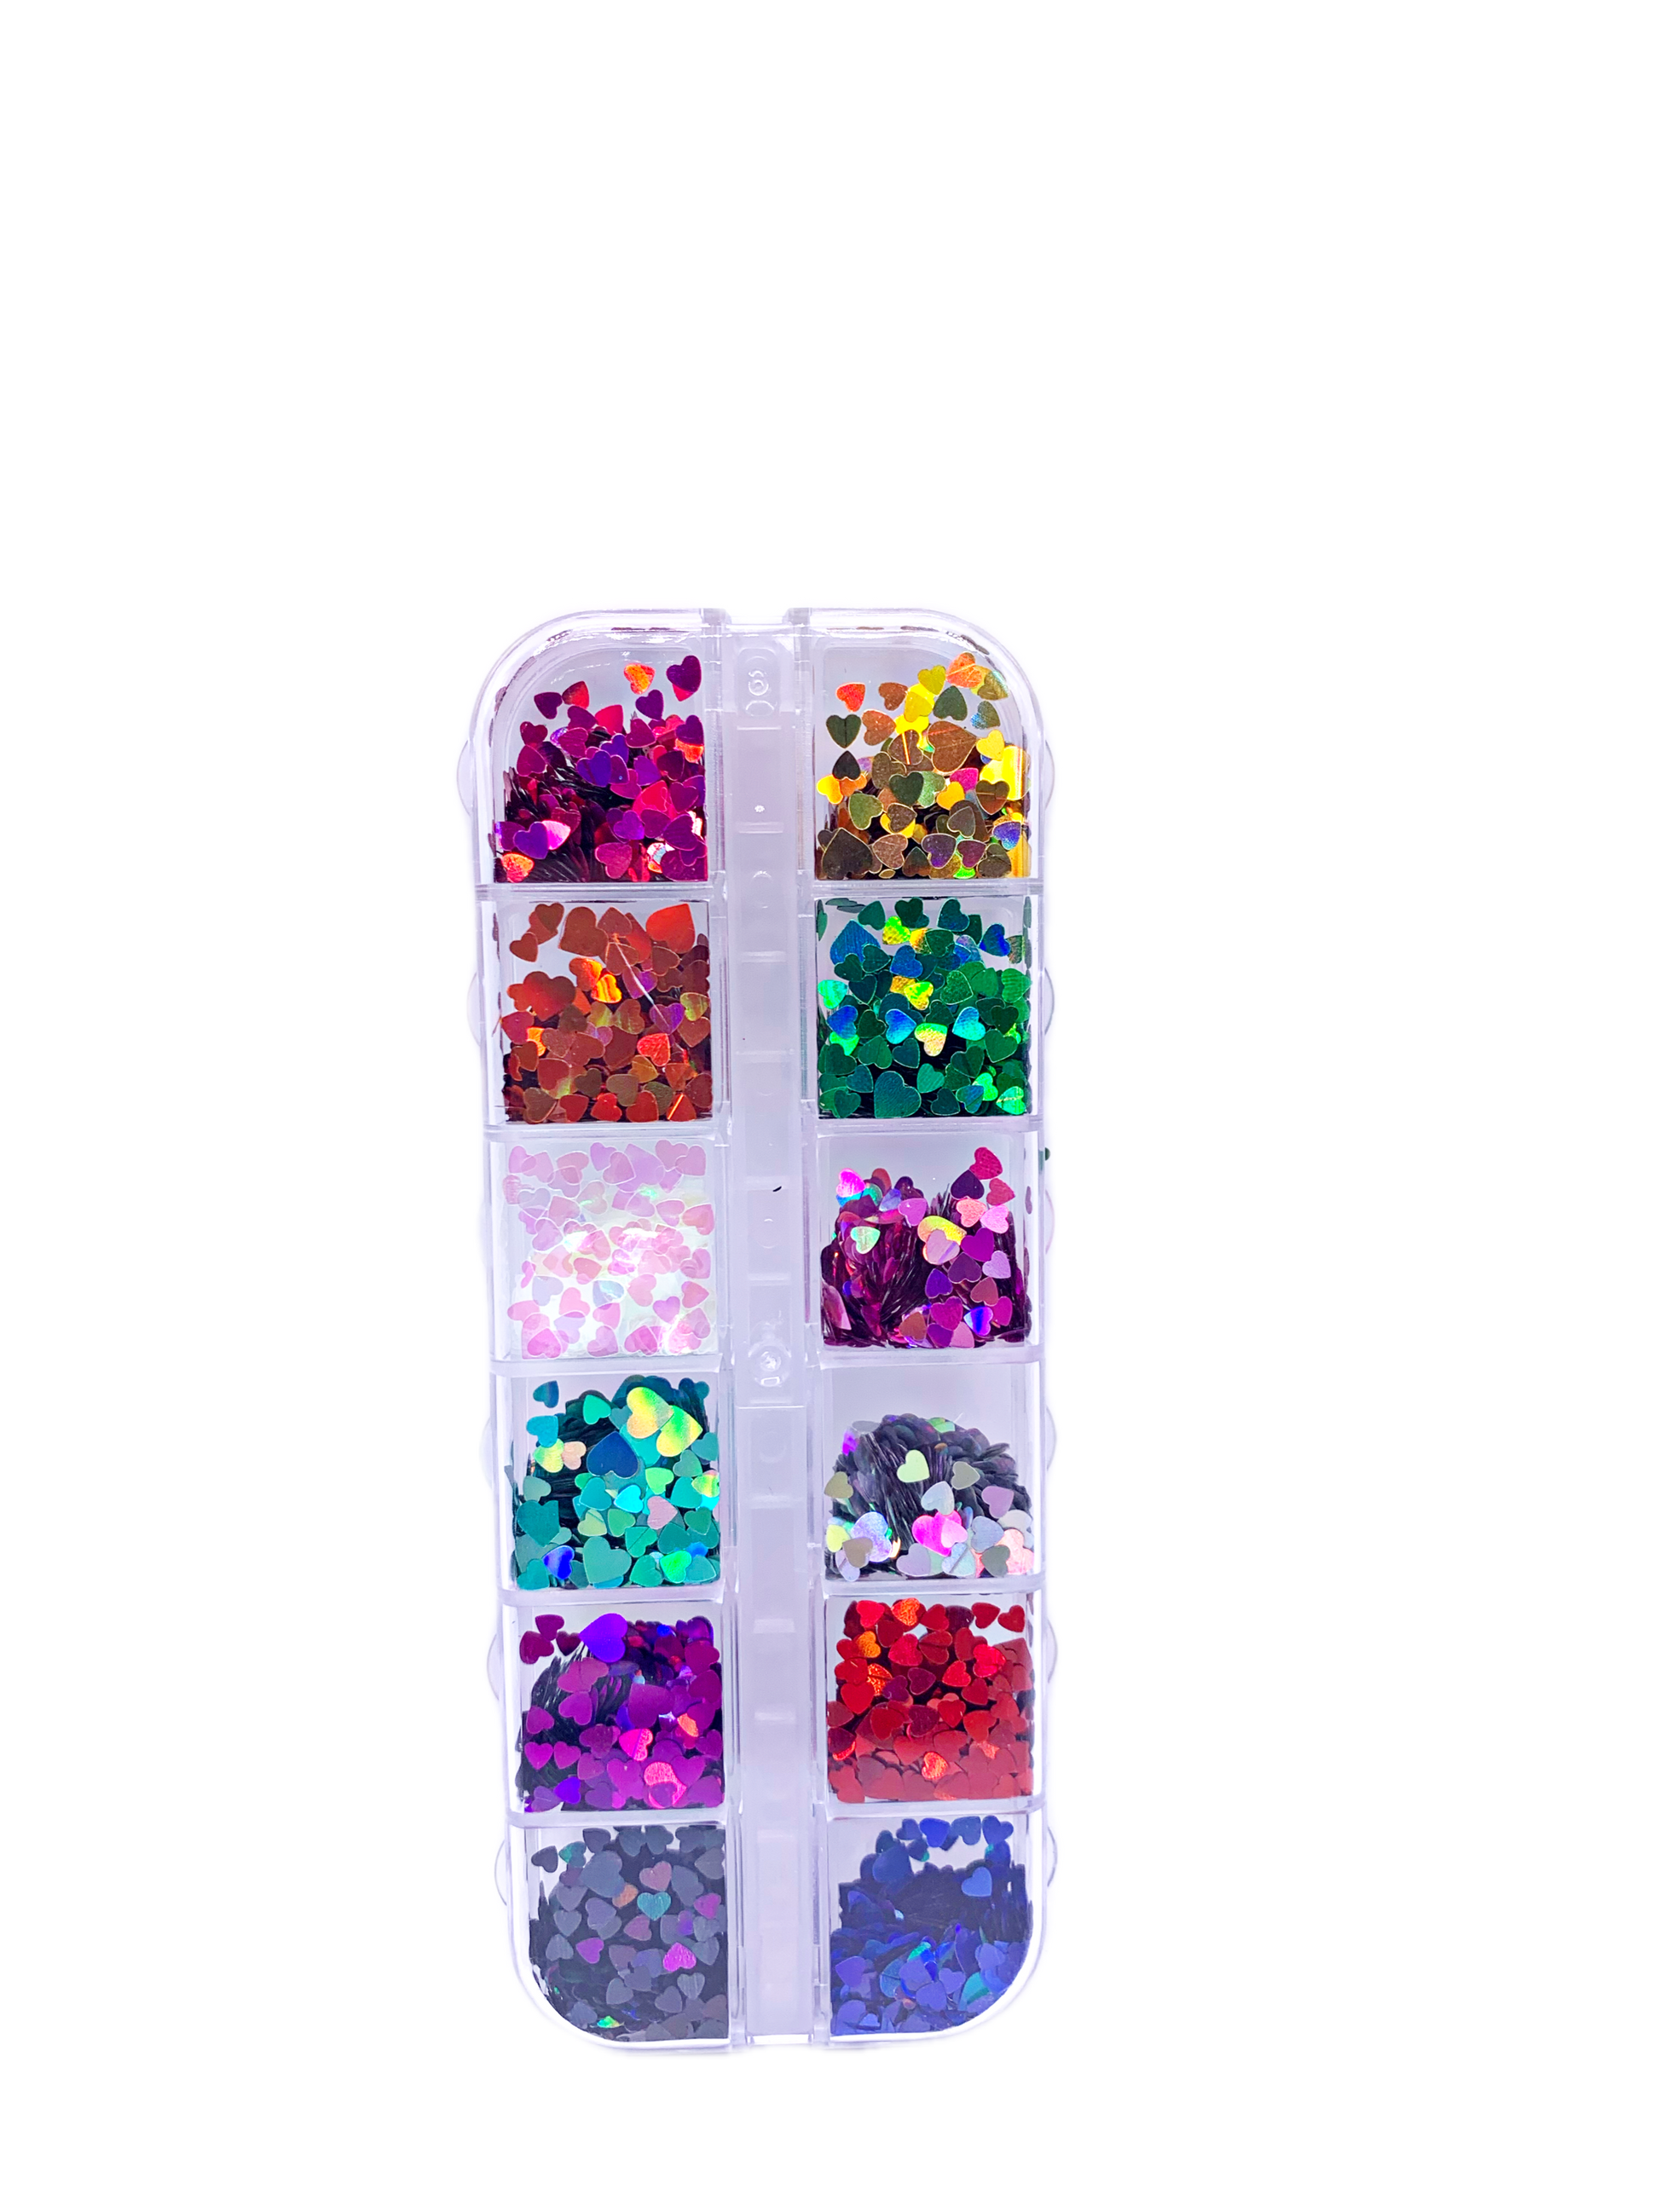 12 Packs: 12 Ct. (144 Total) Shaped Glitter Pack by Creatology, Size: 0.07, Assorted